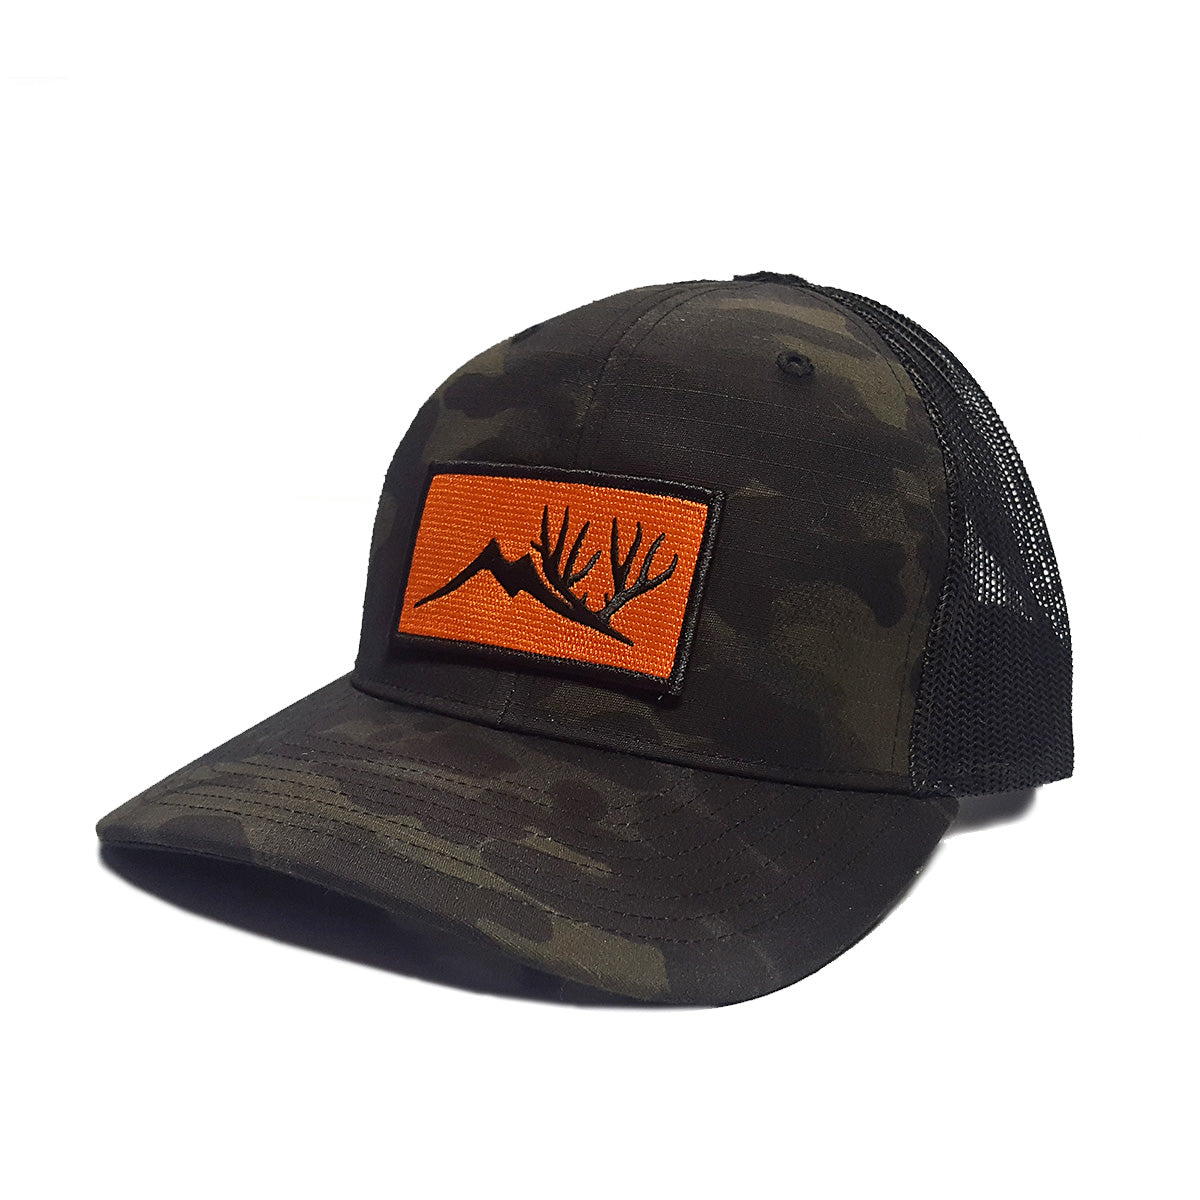 Camouflage ball cap, with black netting, and orange altitude logo patch on forehead 